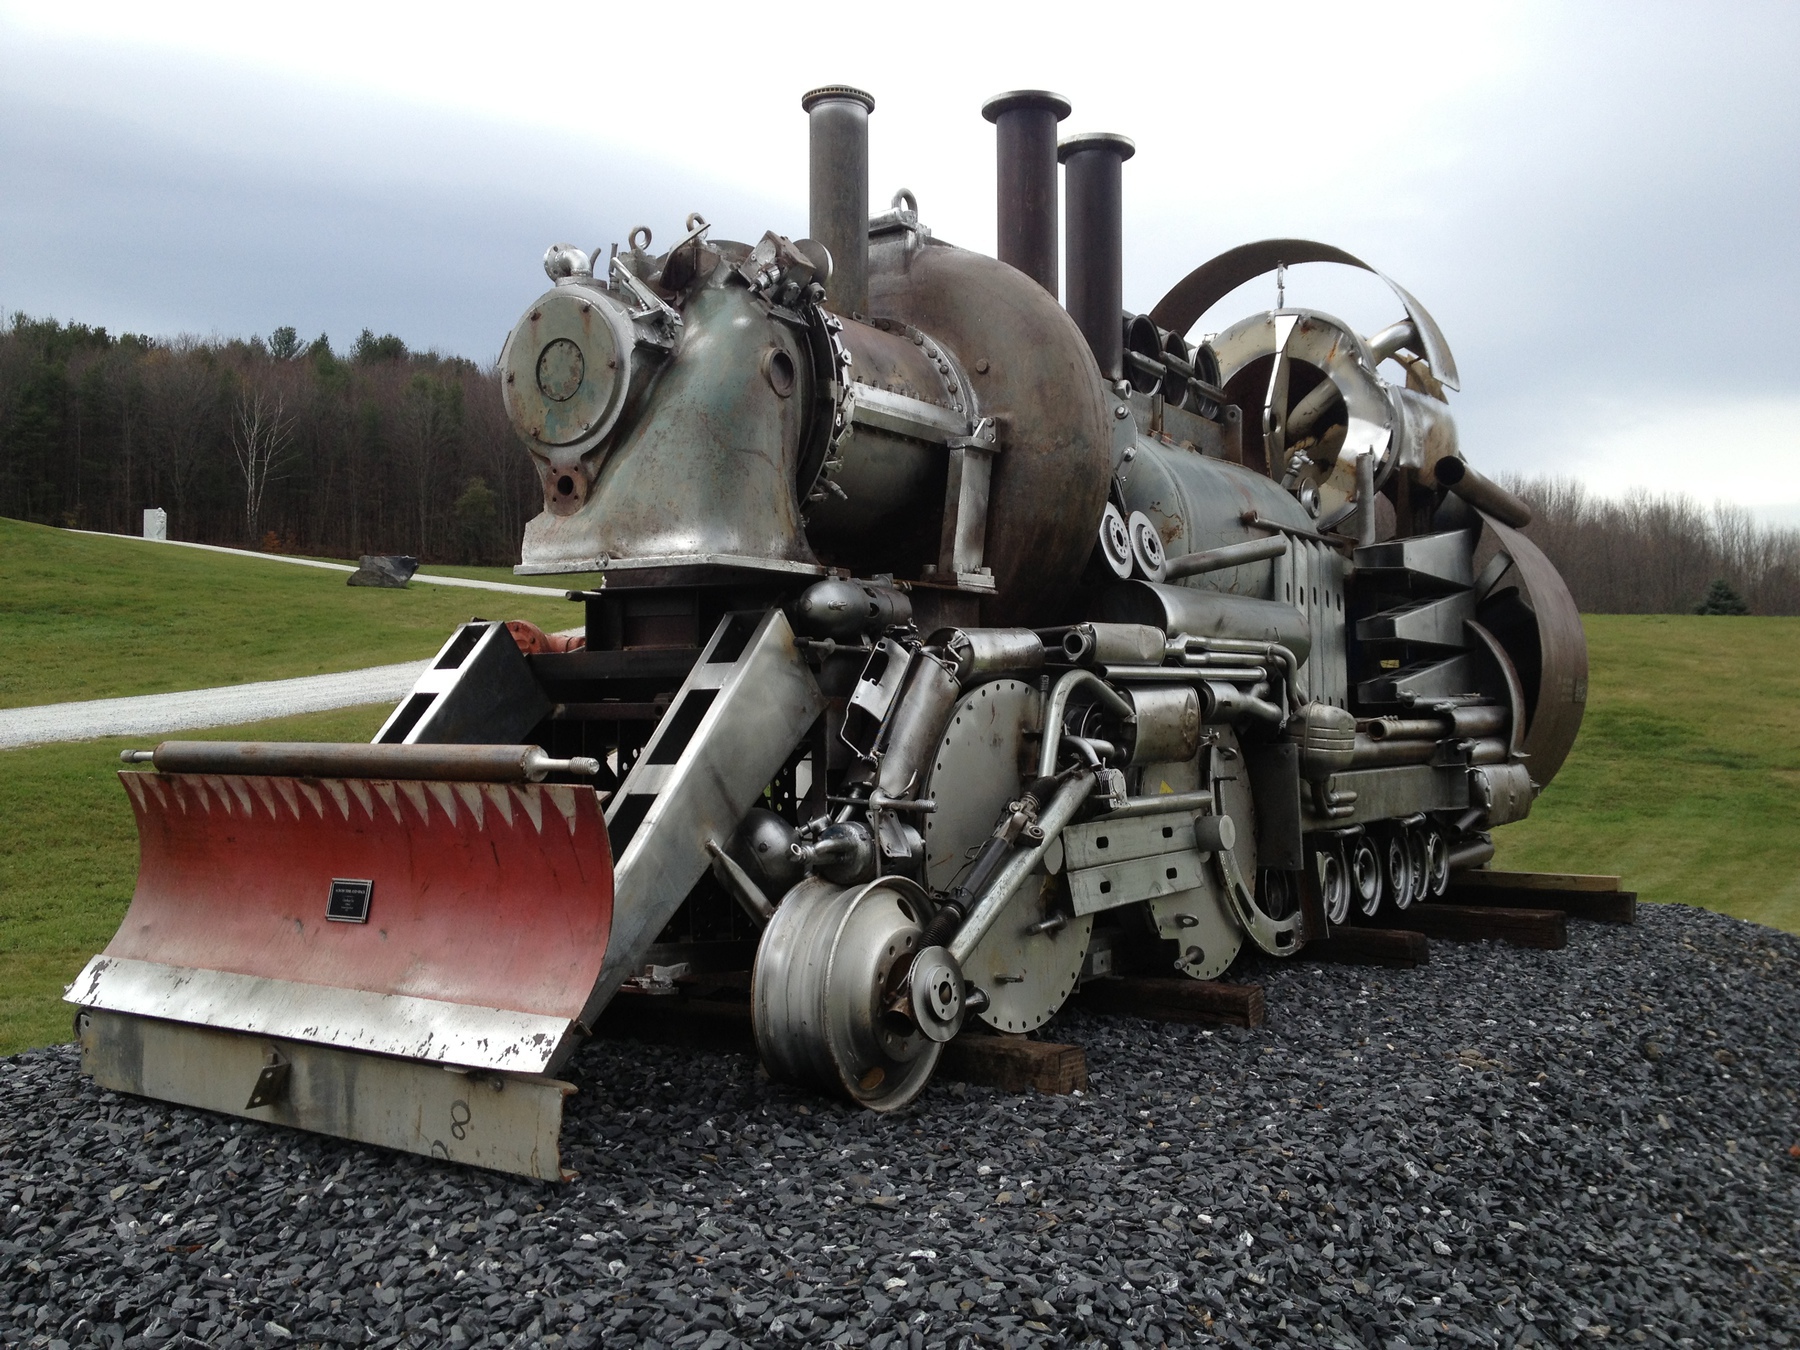 Front of train sculpture made out of random machine parts